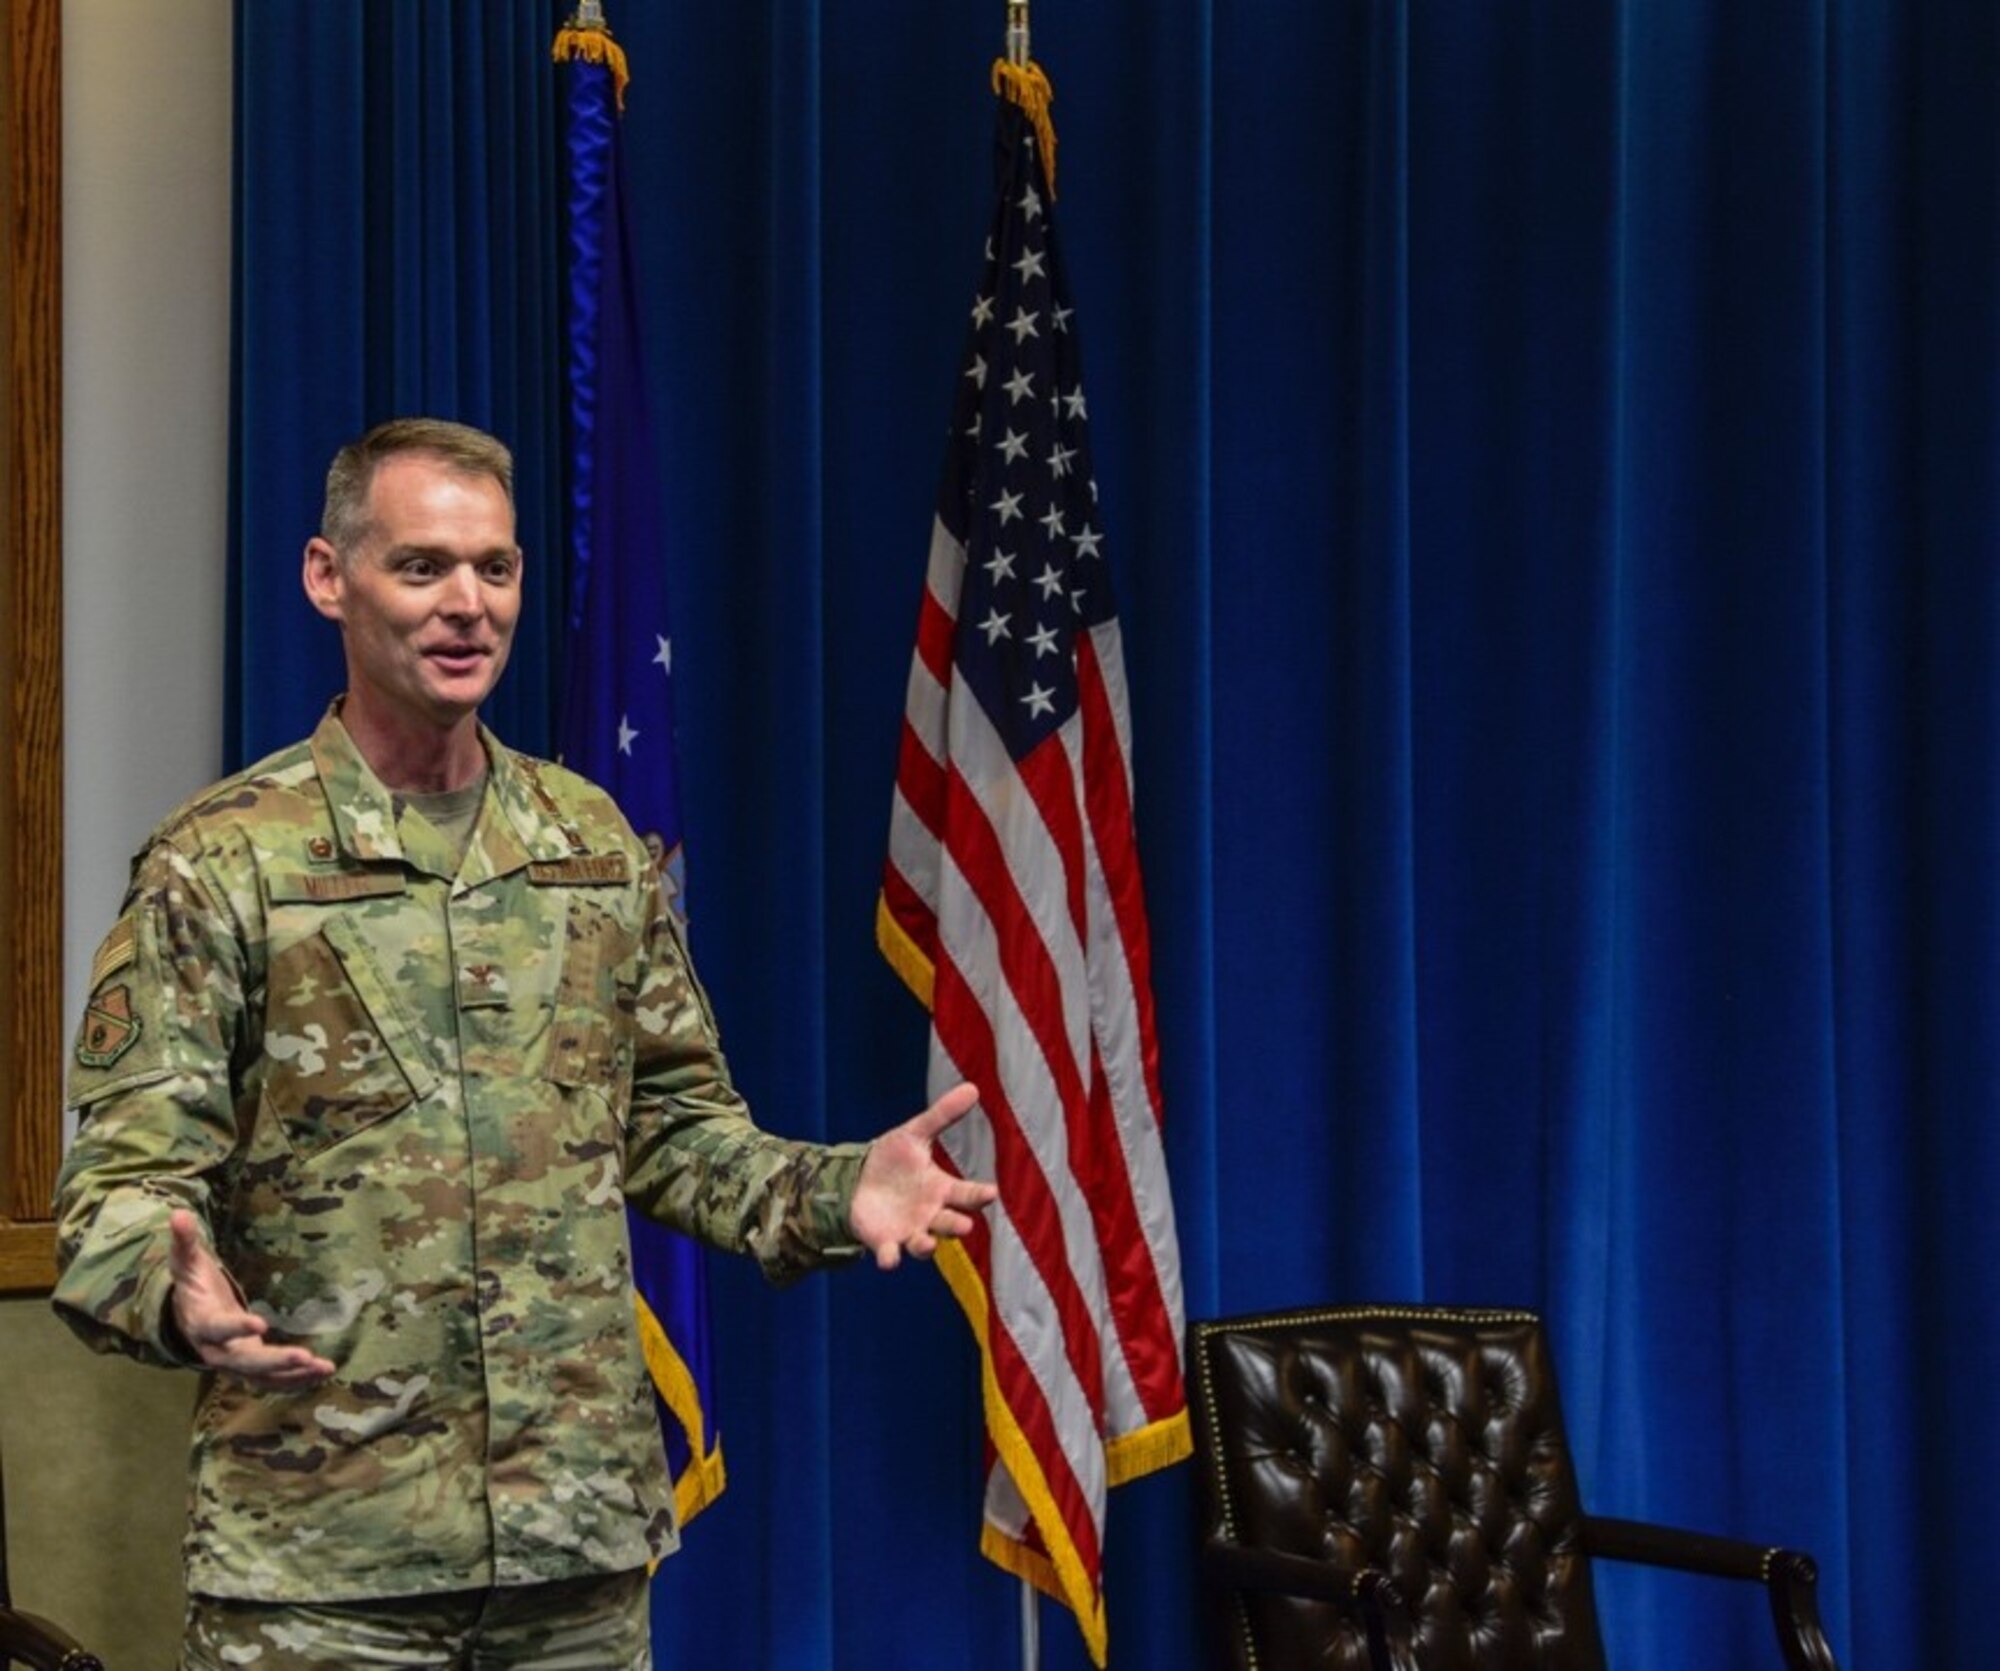 U.S. Air Force Col. David S. Miller, 377th Air Base Wing commander, gives remarks at the Women’s Equality Day event at Kirtland Air Force Base, N.M., August 26, 2019.  In 1973, Congress officially designated August 26 as Women’s Equality Day to commemorate the 1920 adoption of the 19th amendment of the U.S. constitution, making it illegal to deny citizens the right to vote based on their gender. (U.S. Air Force photo by Senior Airman Alexandria Crawford)